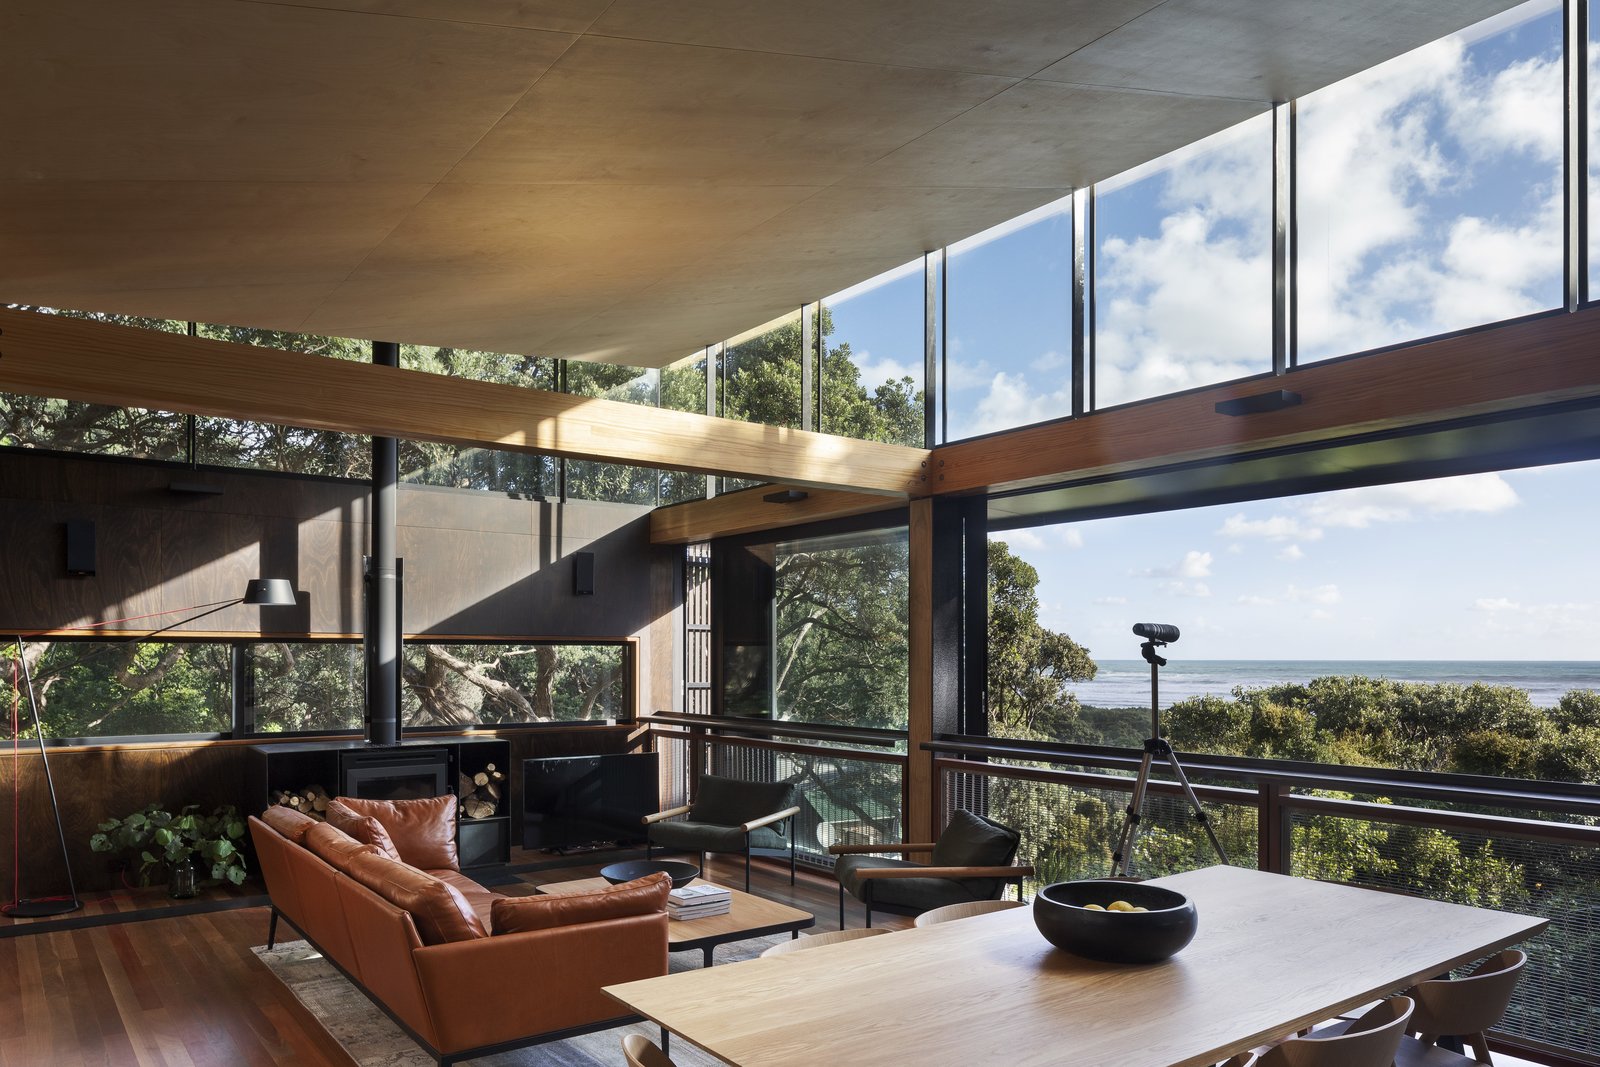 The most important aspect of designing this home was capturing the views from every angle. By placing the home on stilts, Herbst was able to make the best use of the surroundings. 